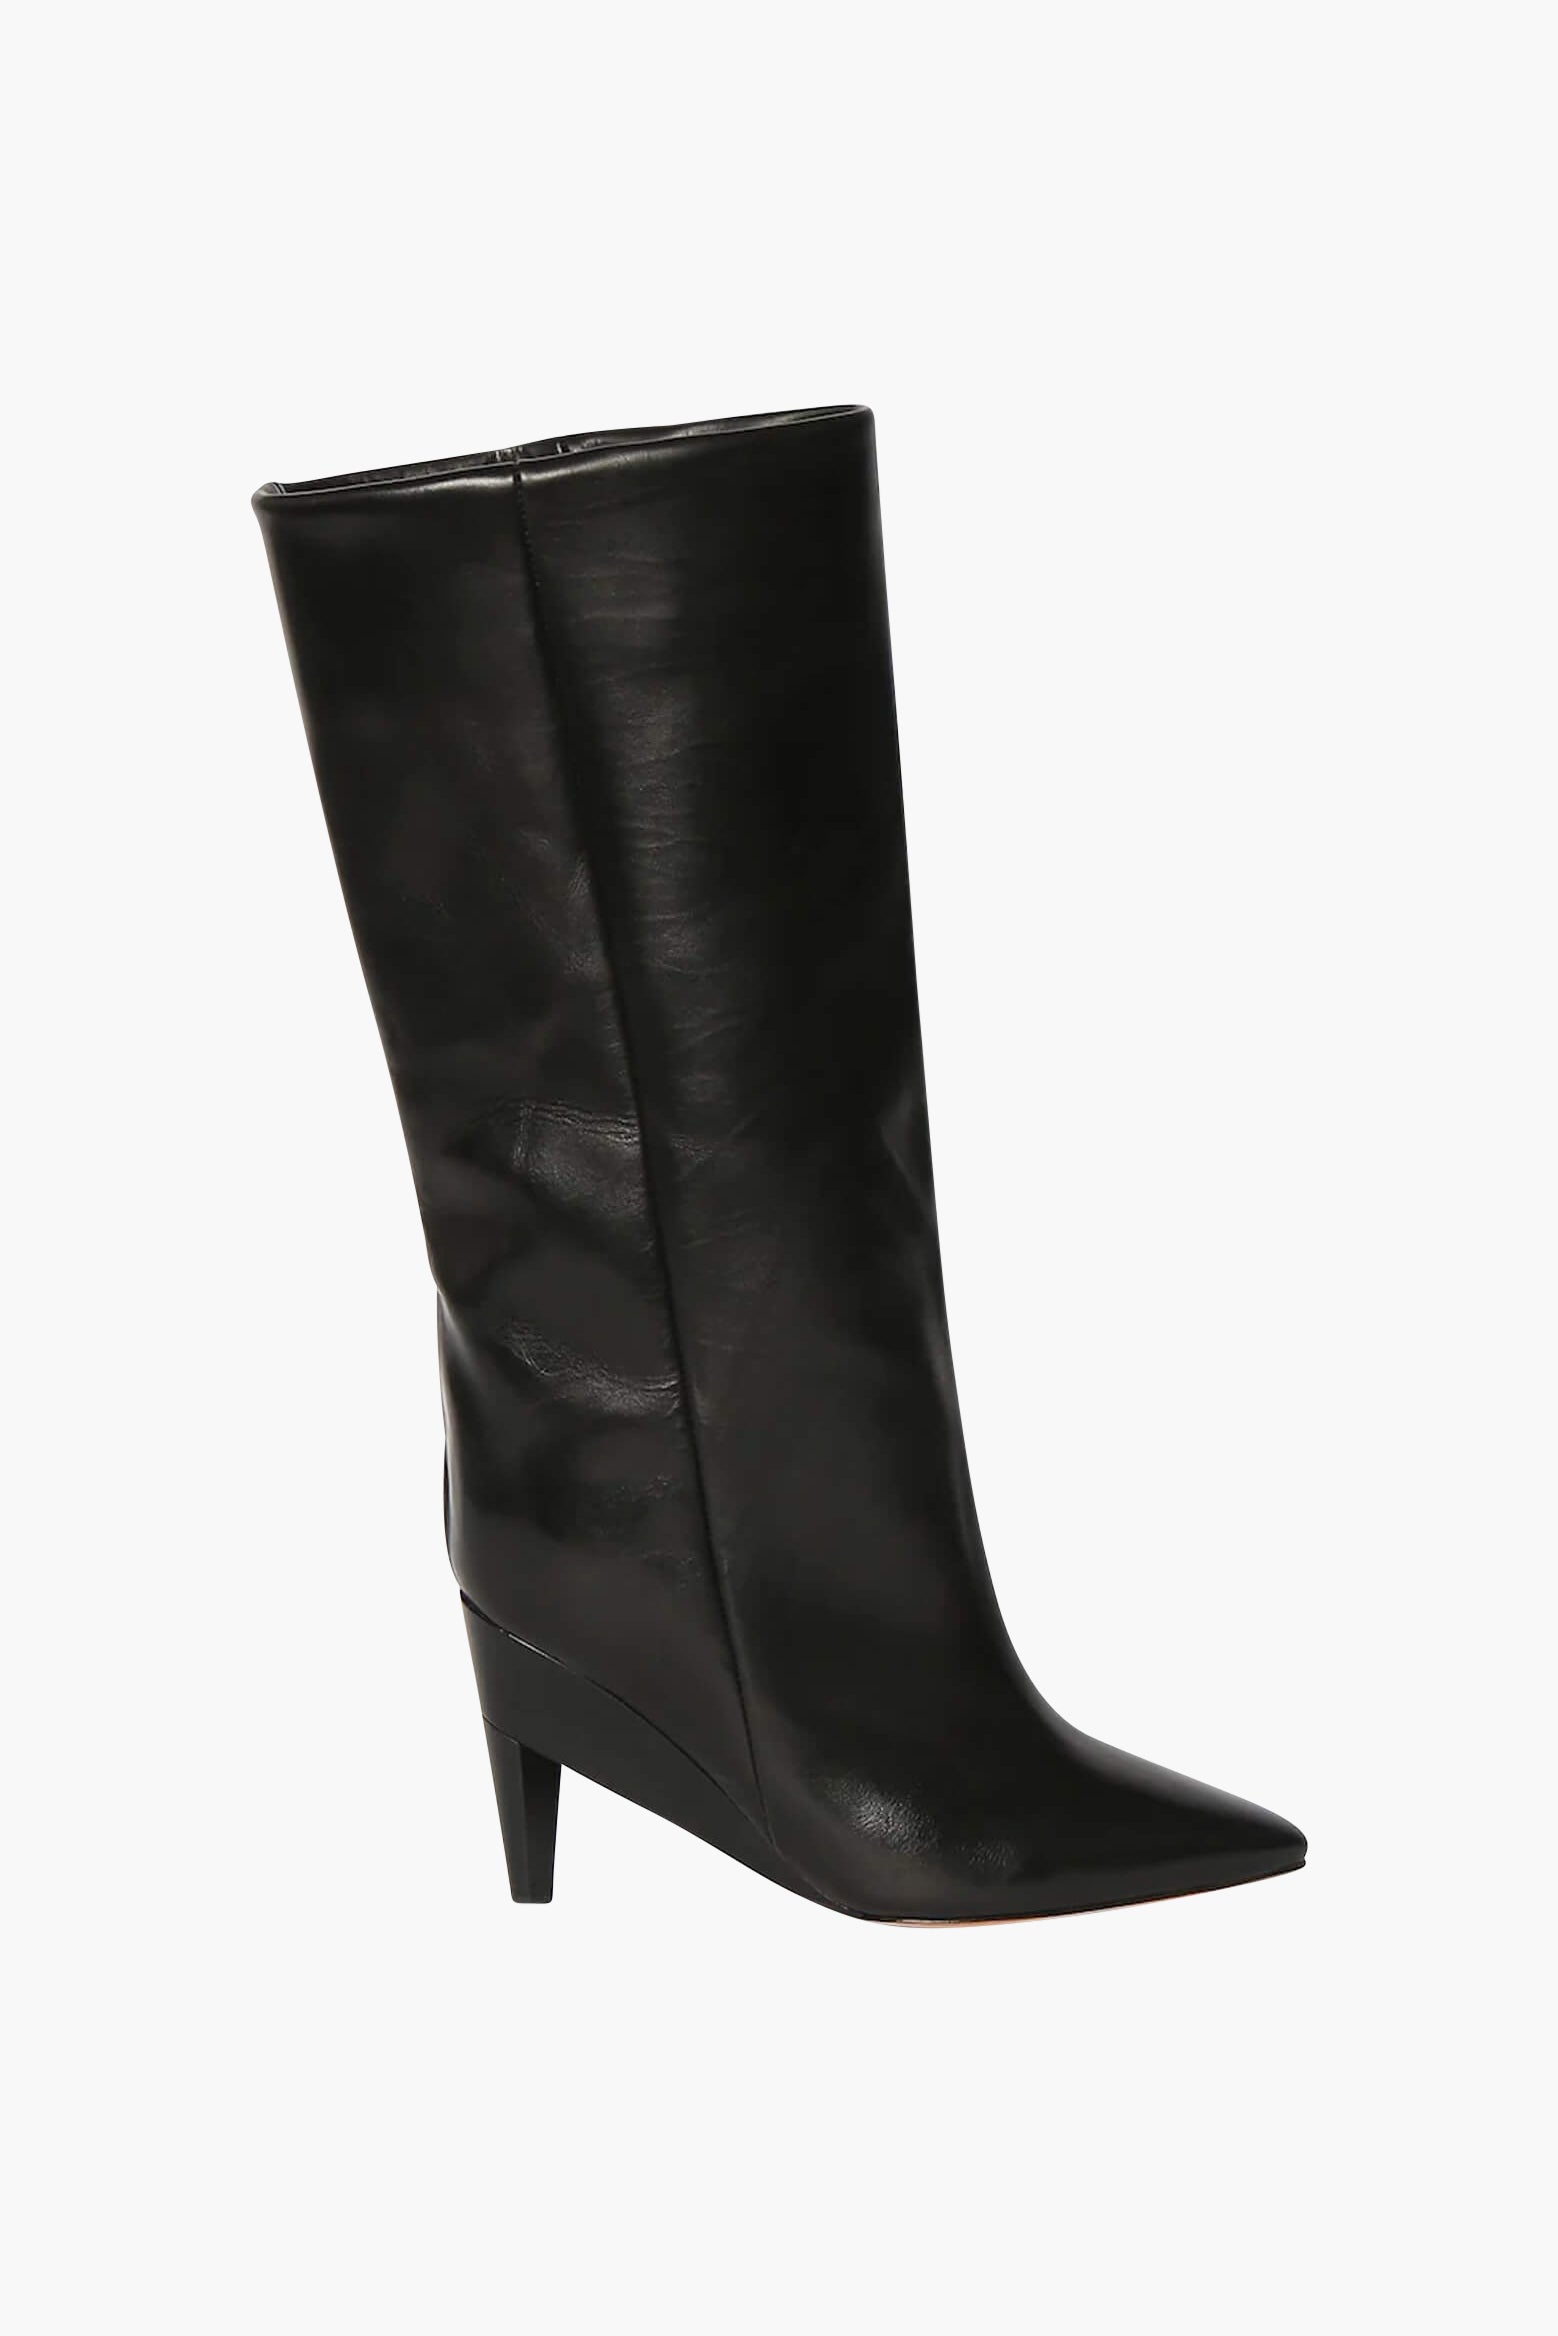 Isabel Marant Liesel High Boot in Black available at The New Trend Australia. Free shipping on orders over $300 AUD.